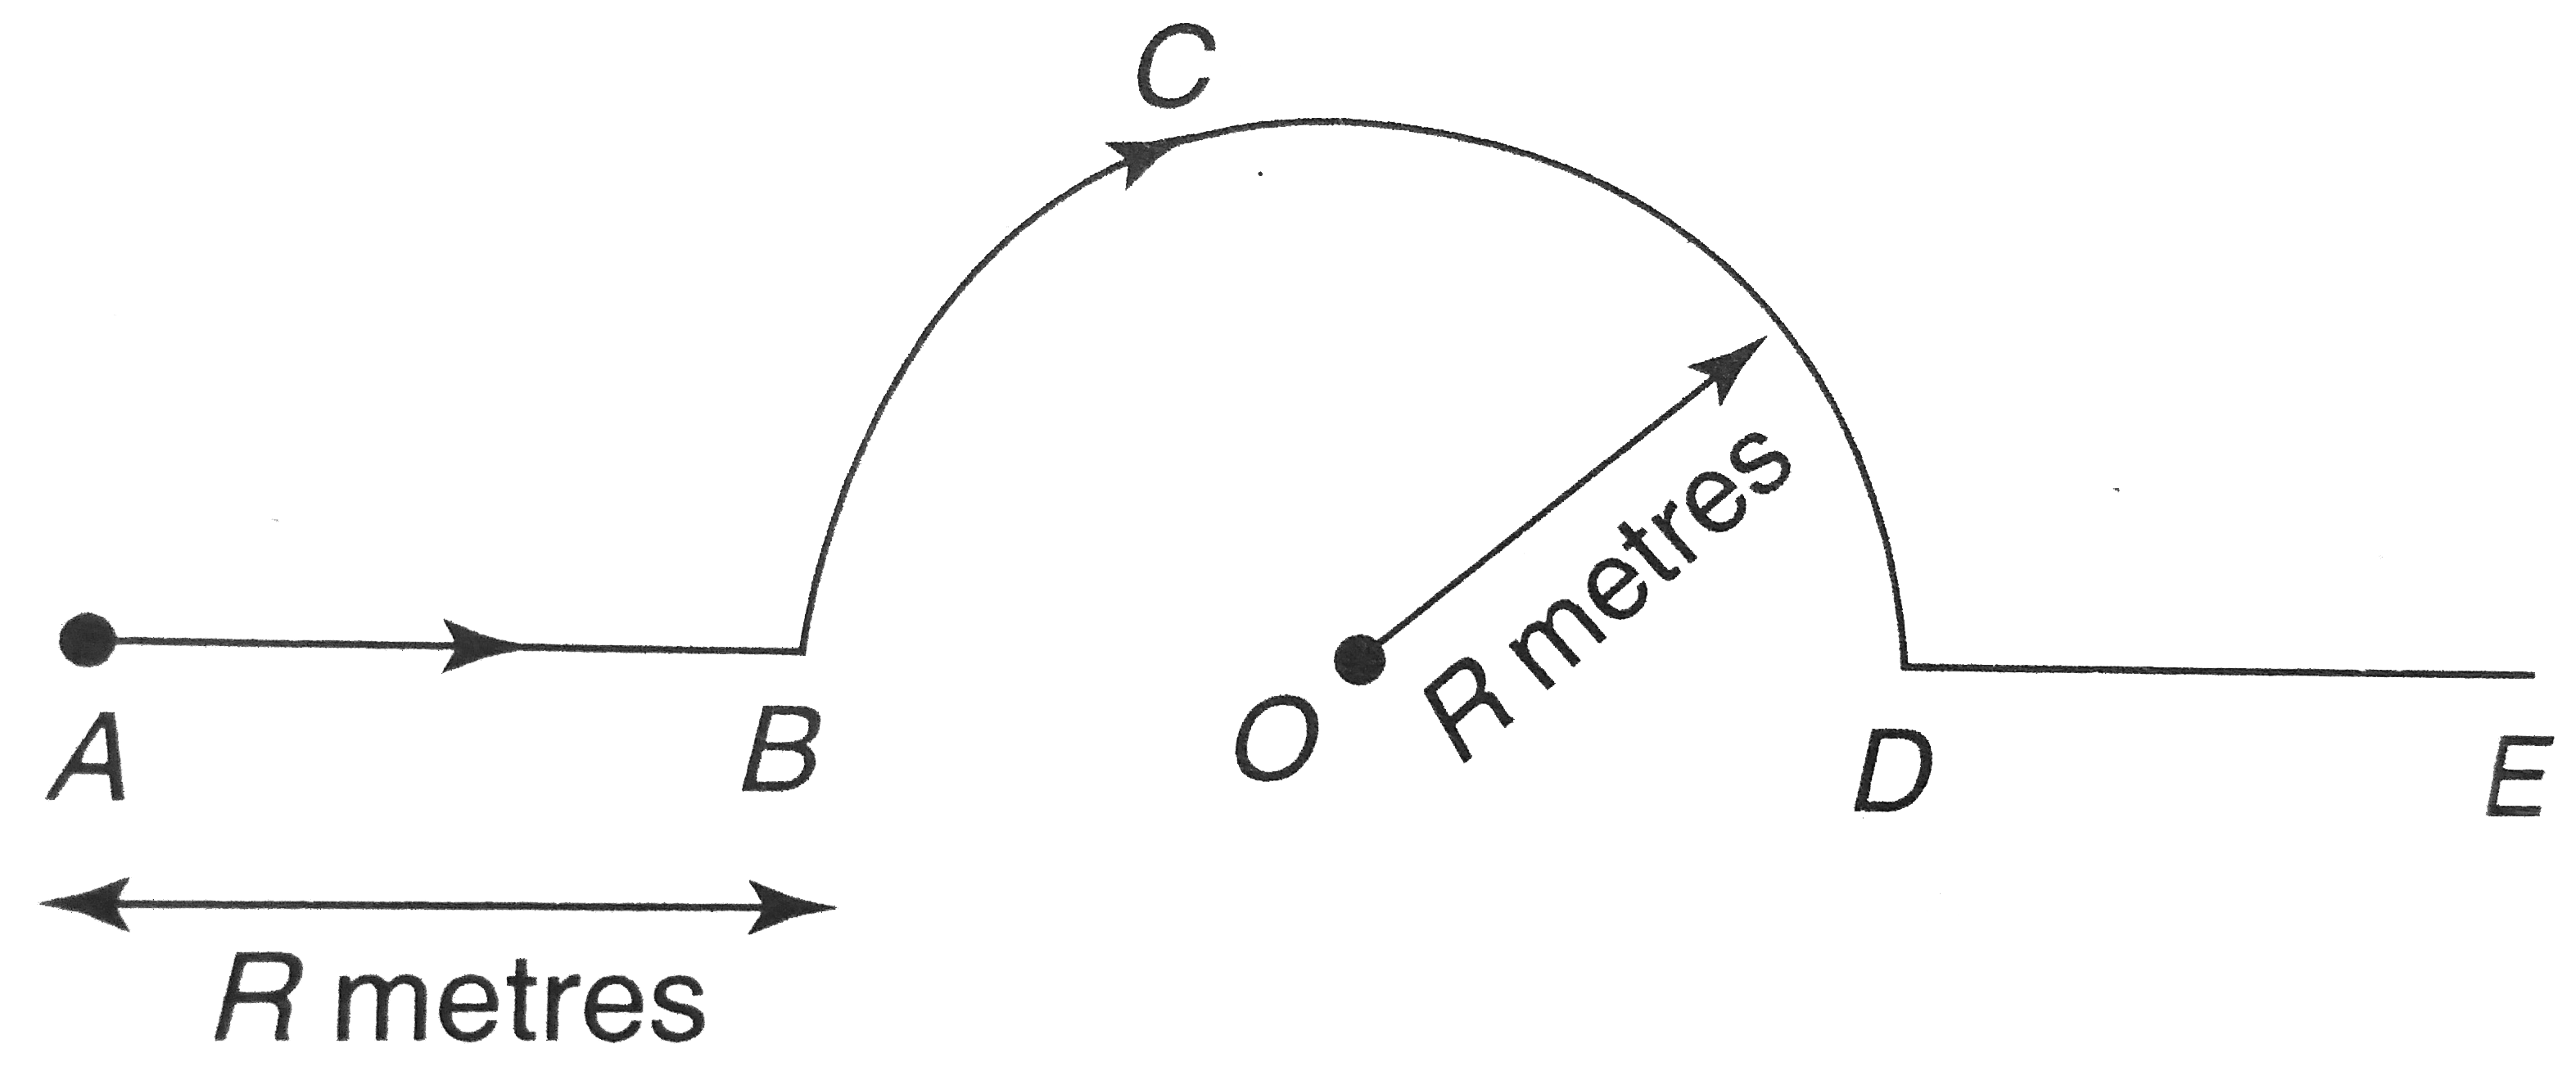 A particle at t = 0 second is at point A and moves along the shown path (ABCDF) with uniform speed v = (1 + (pi)/(3)) m//s. Both the straight segments AB and DE are along the diameter BD of semicircle BCD radius R = 1 meter. Find the instant of time at which the instantaneous velocity of the particle is along the direction of average velocity from t = 0 second to that instant.